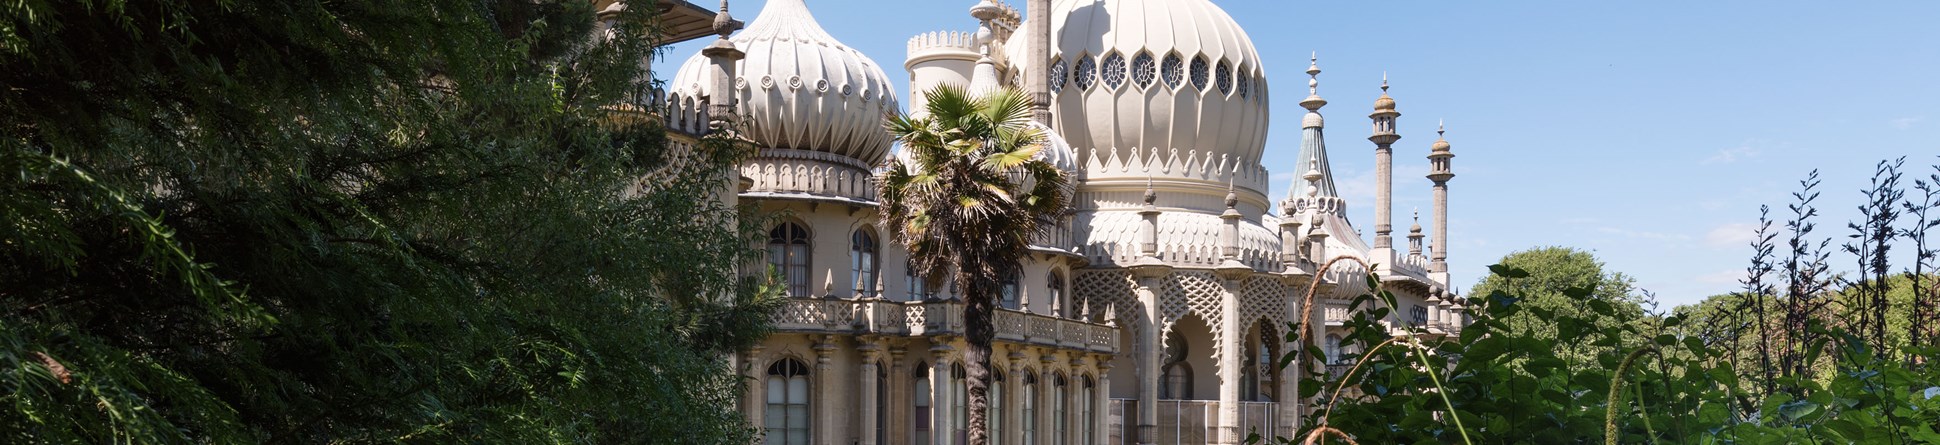 Royal Pavilion Gardens, Brighton, with lush vegetation in the foreground and a clear blue sky behind.